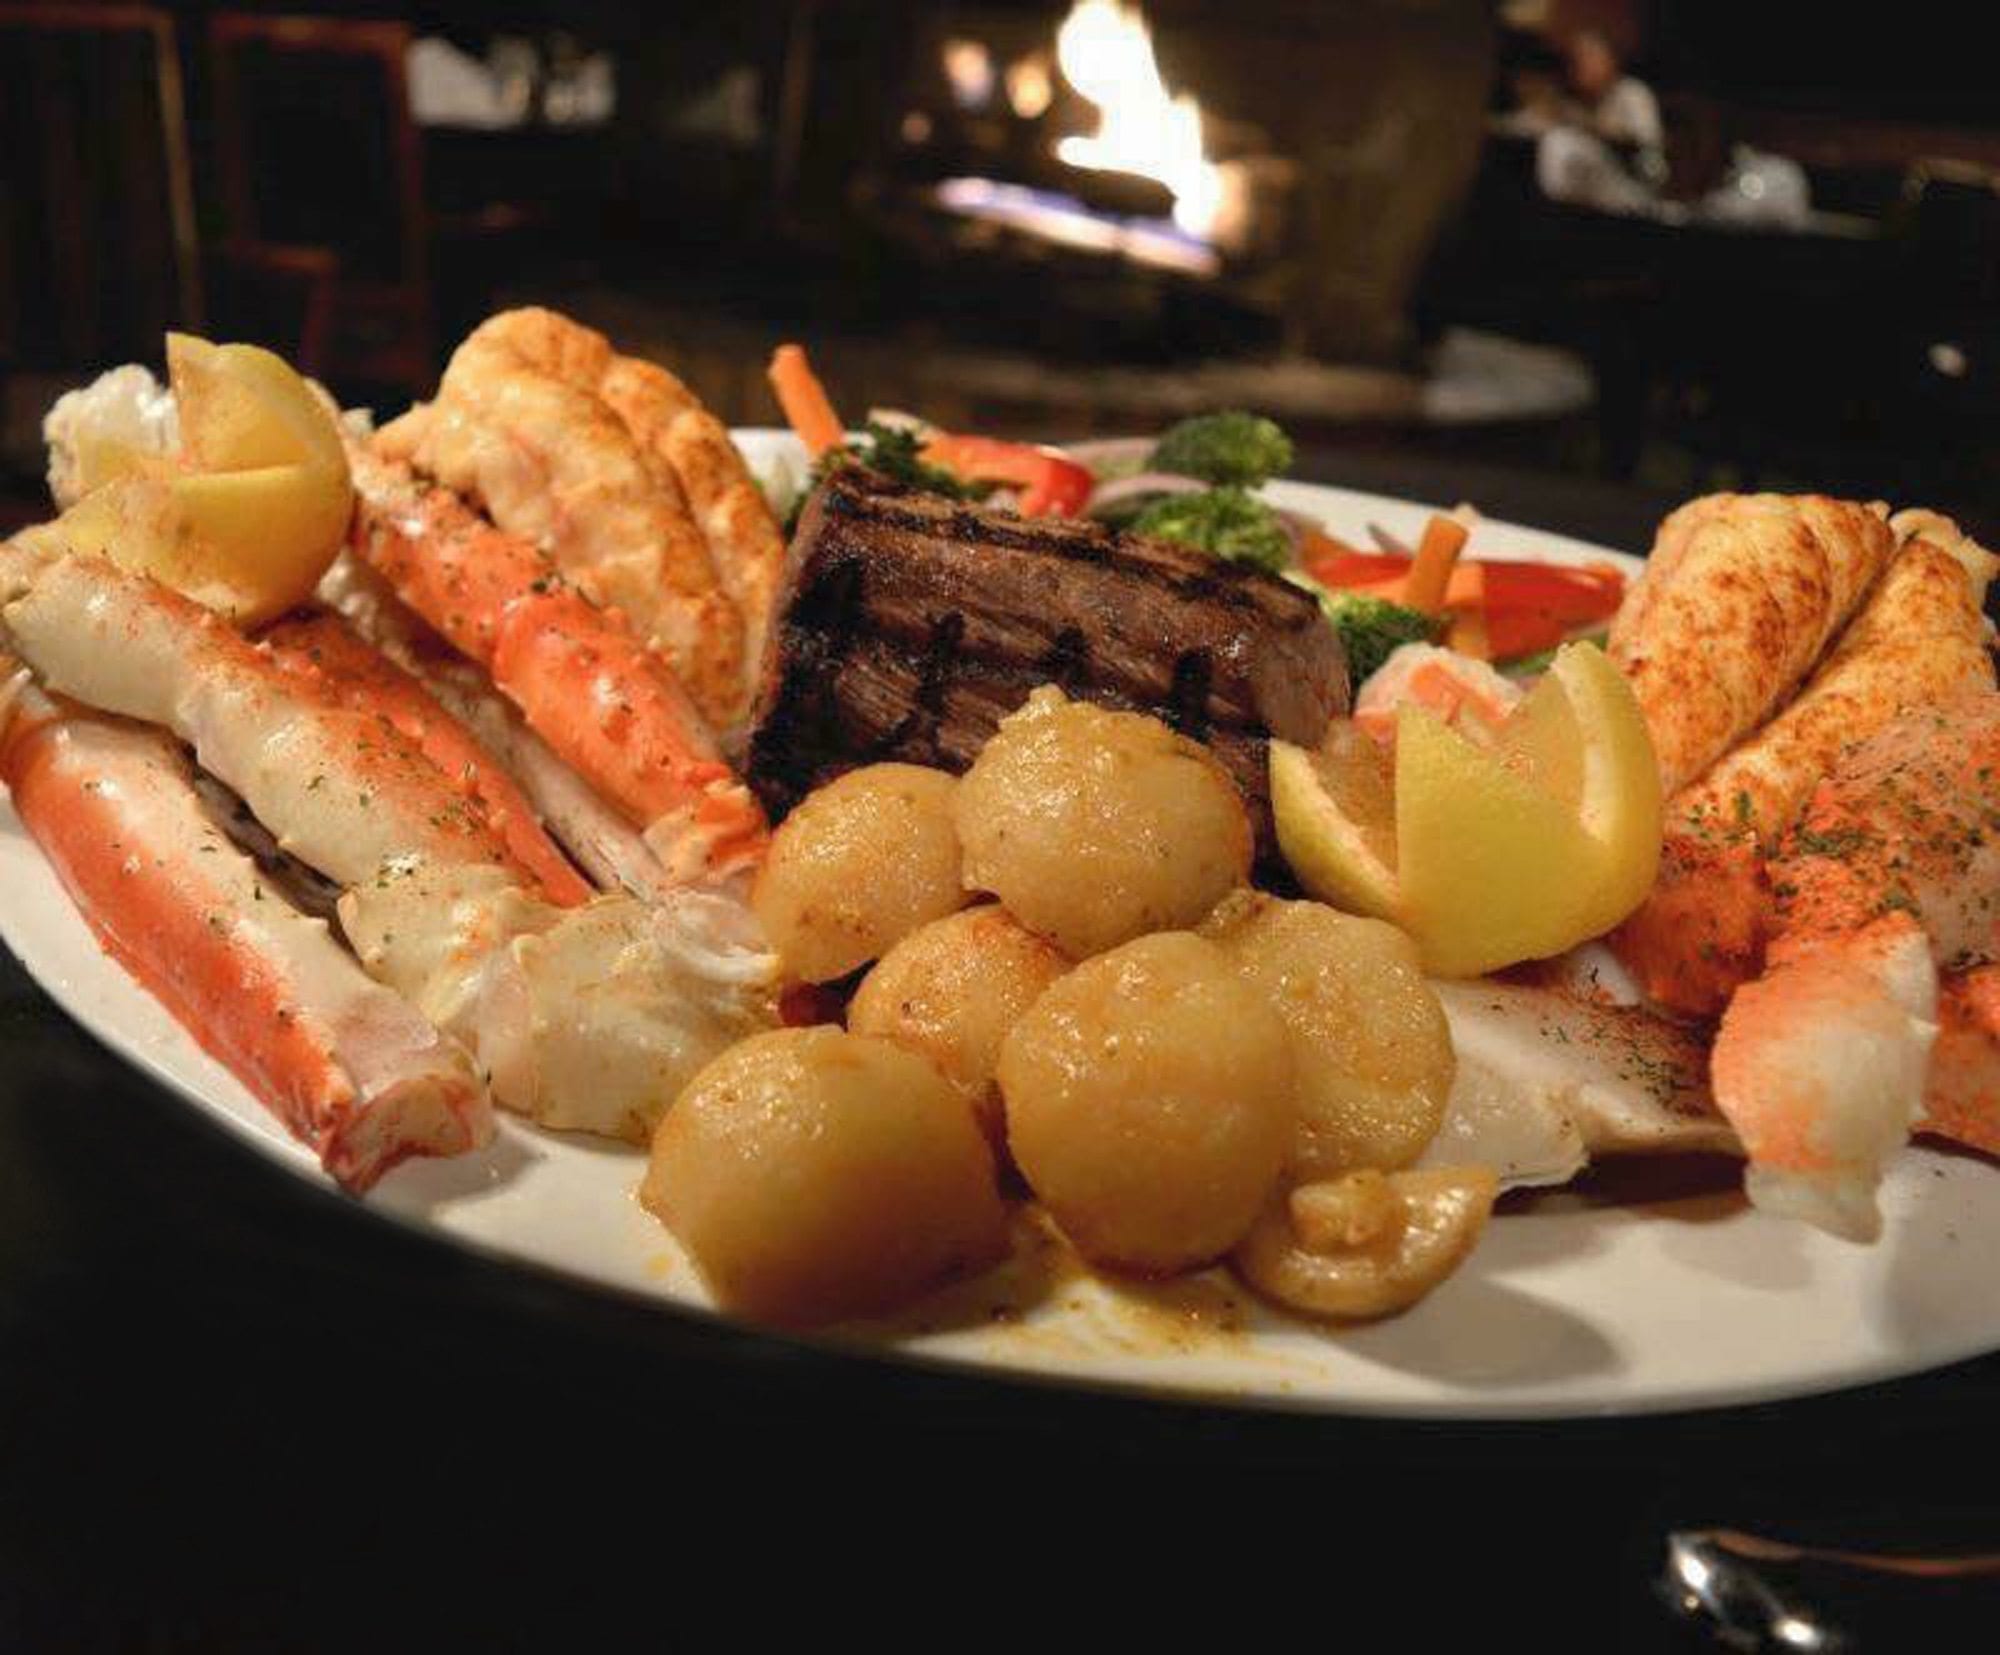 Surf and turf platter